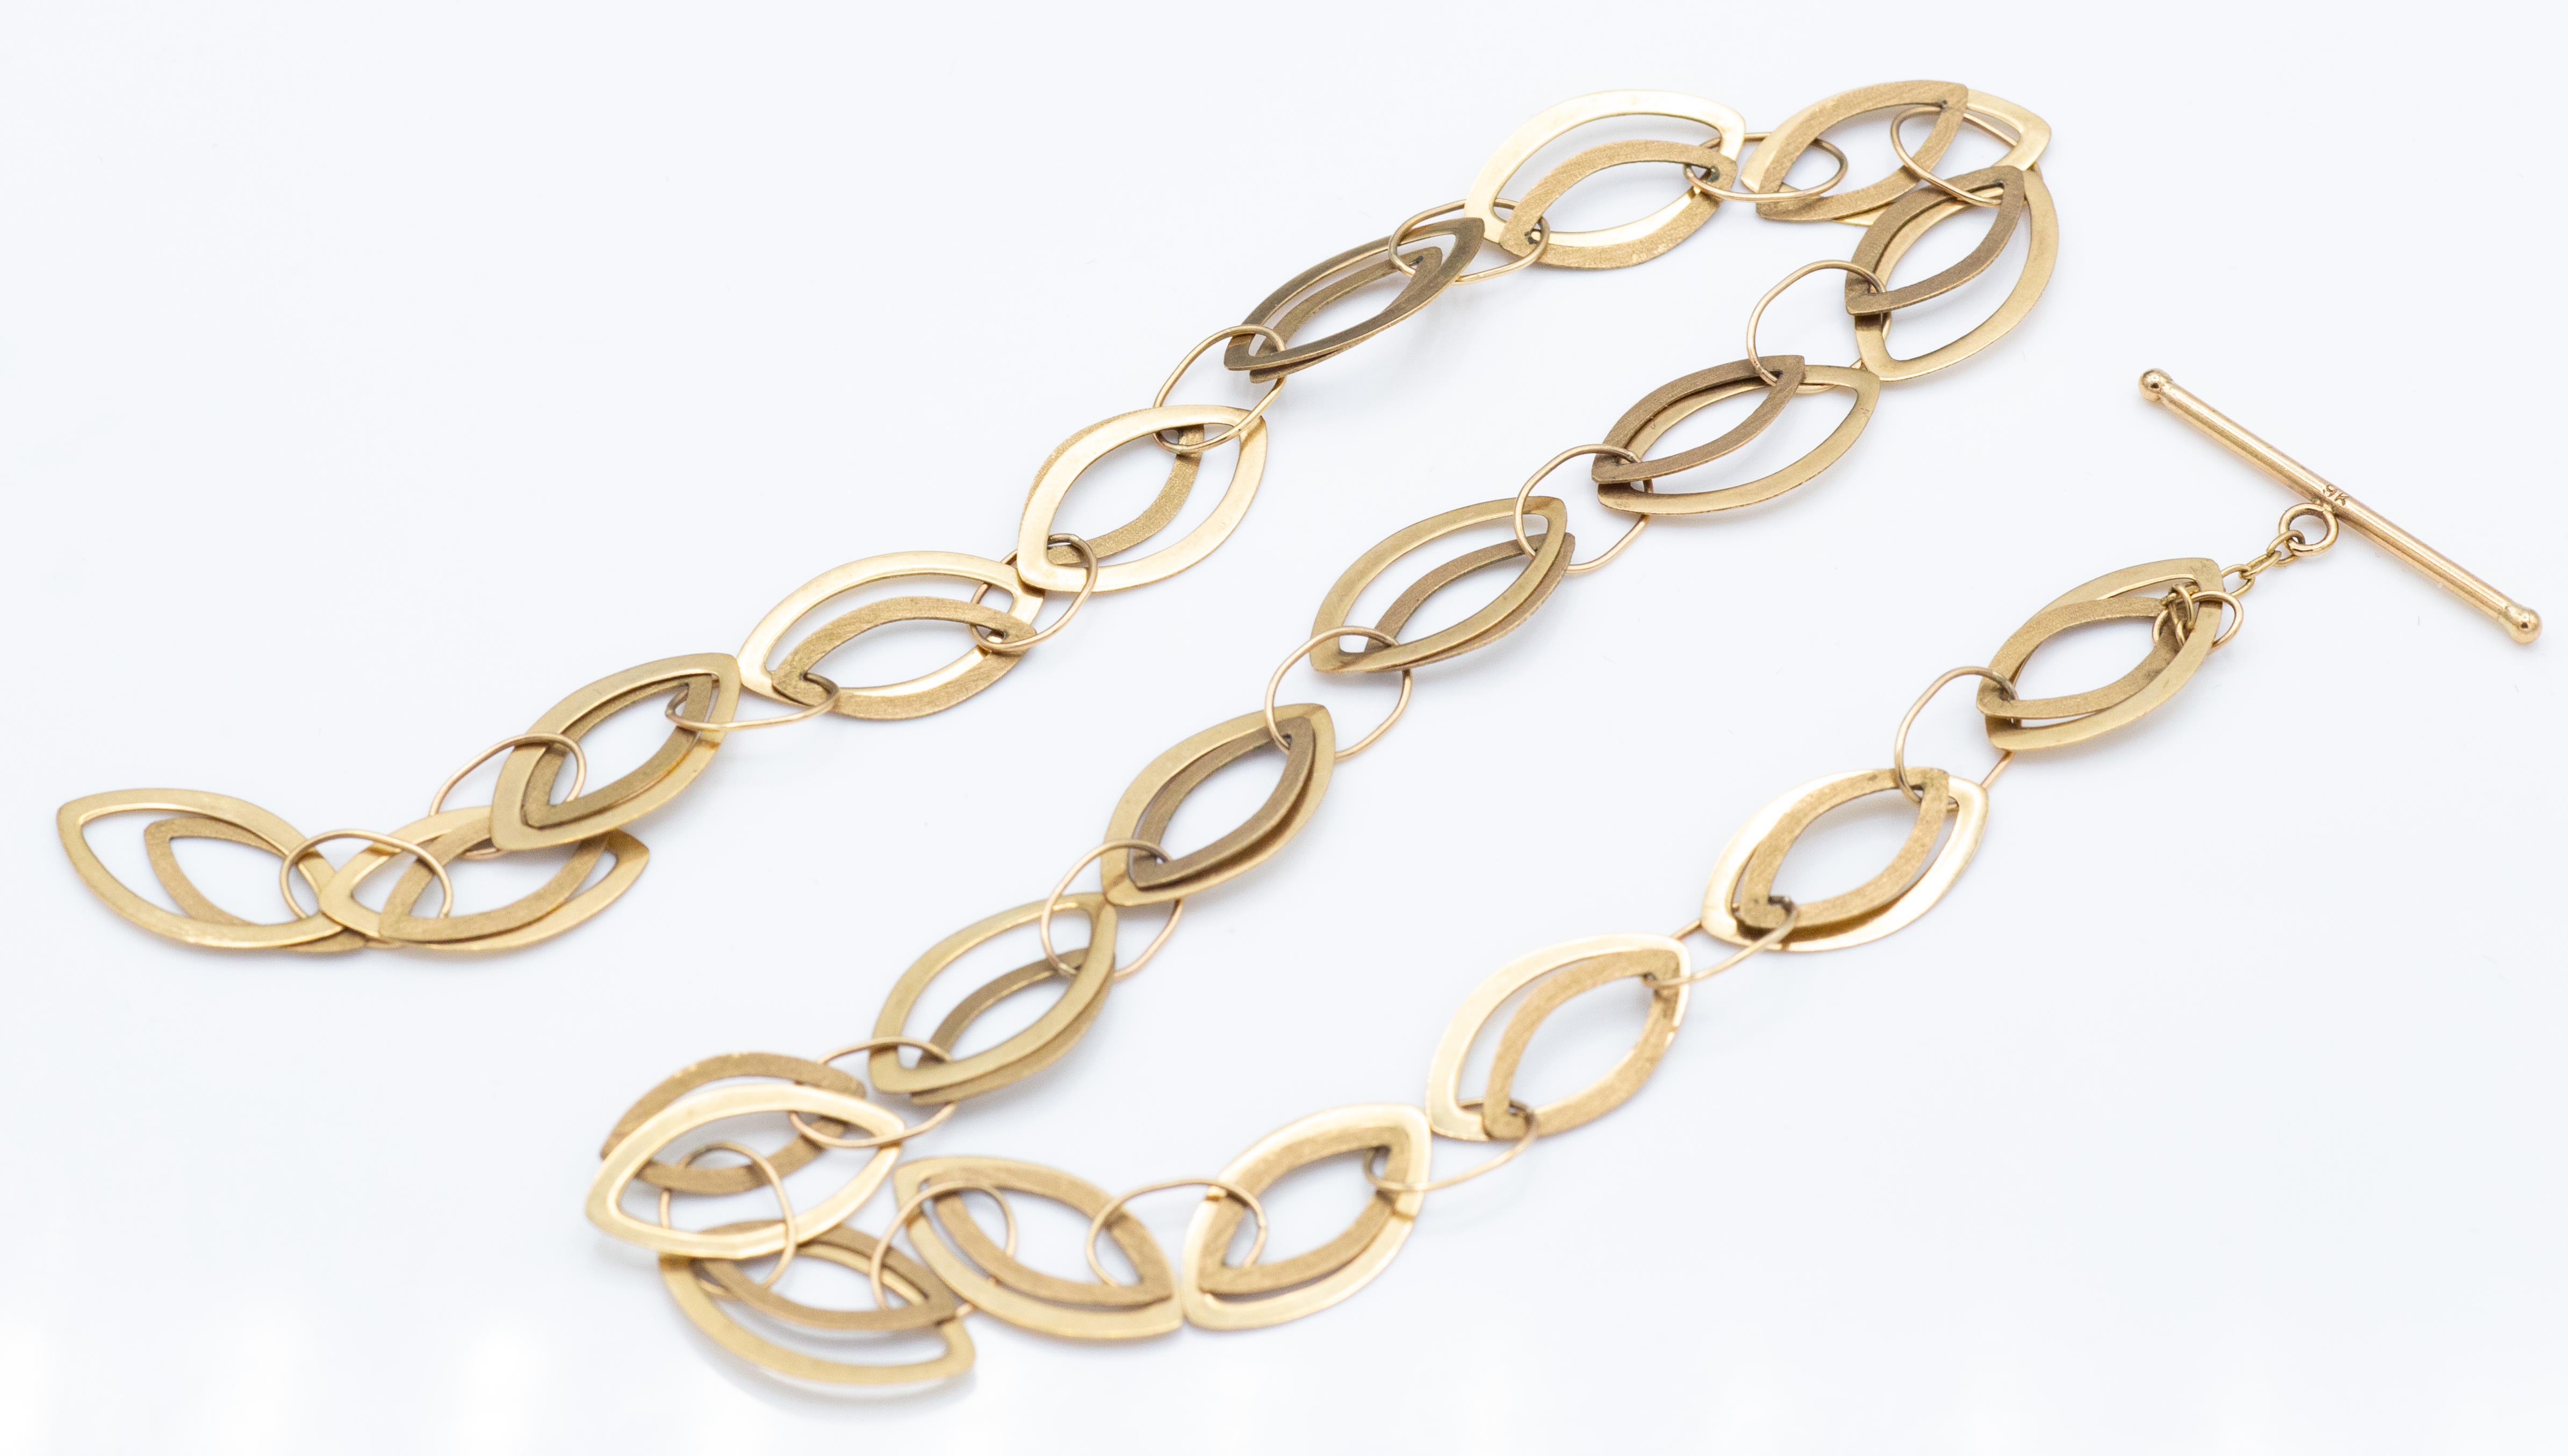 A Hallmarked 9ct Gold Fancy Chain Necklace